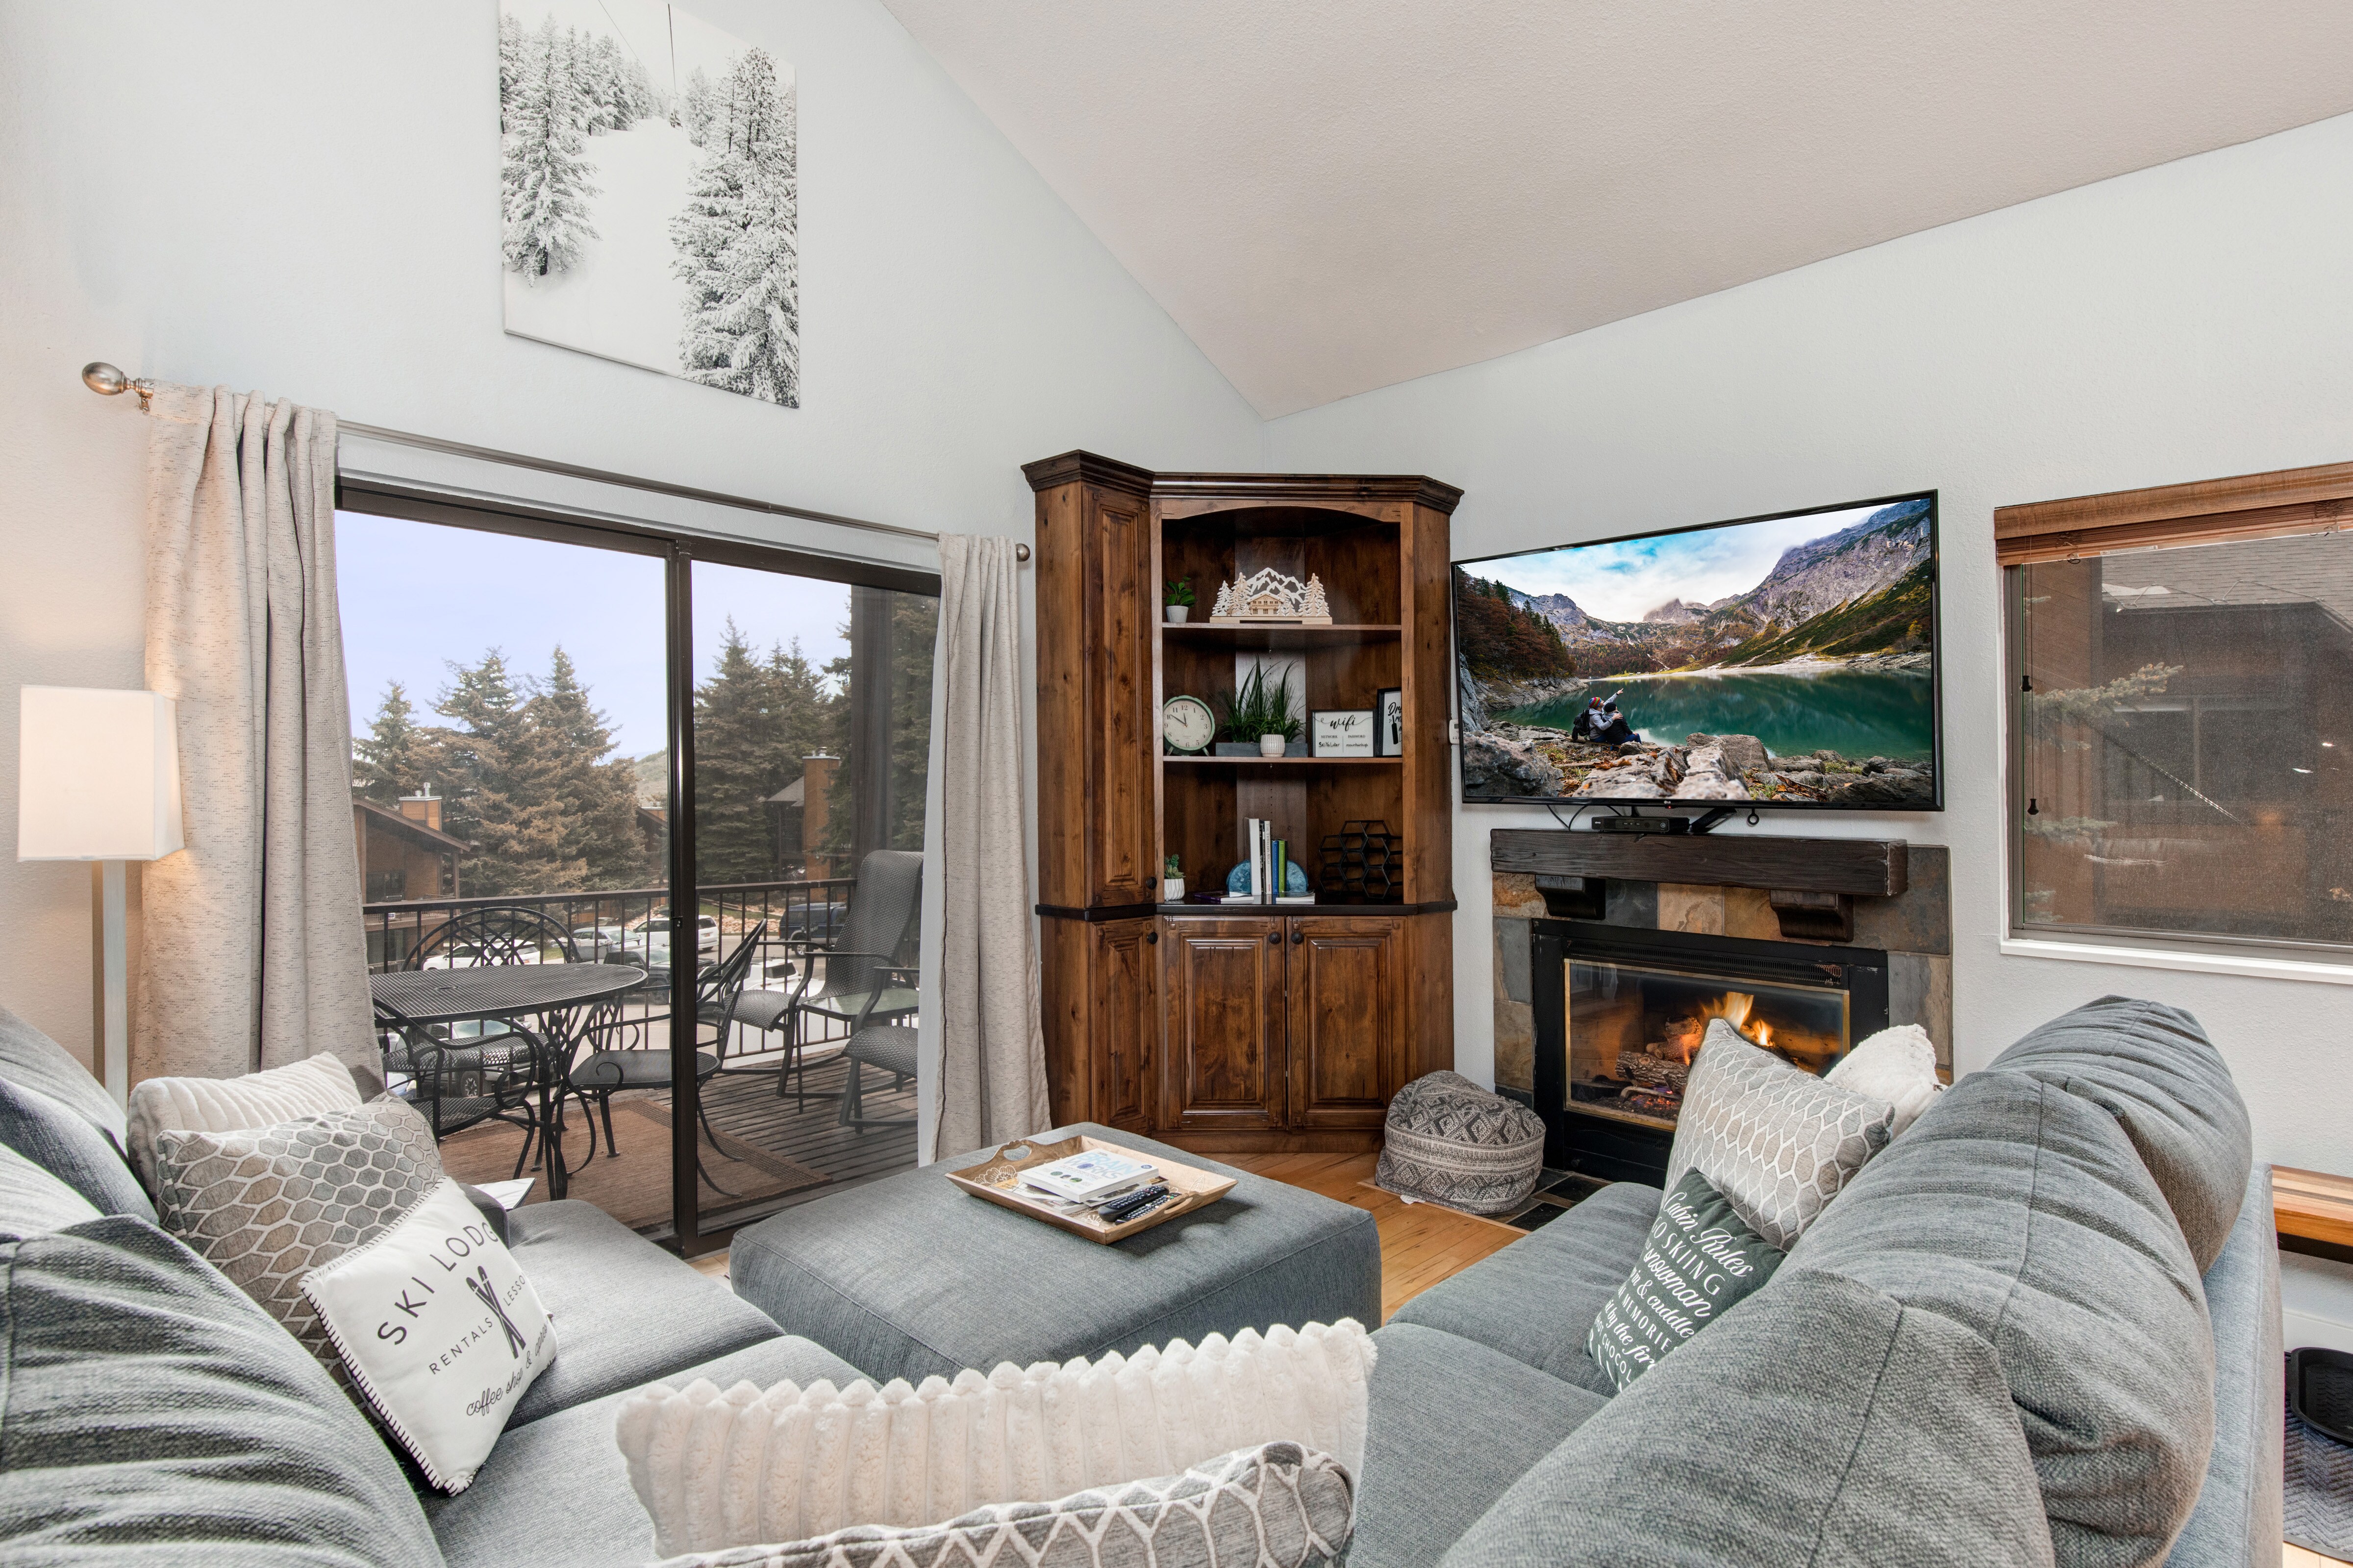 Living room with gas fireplace, Smart tv & sound-bar, plush furnishings, and private deck access